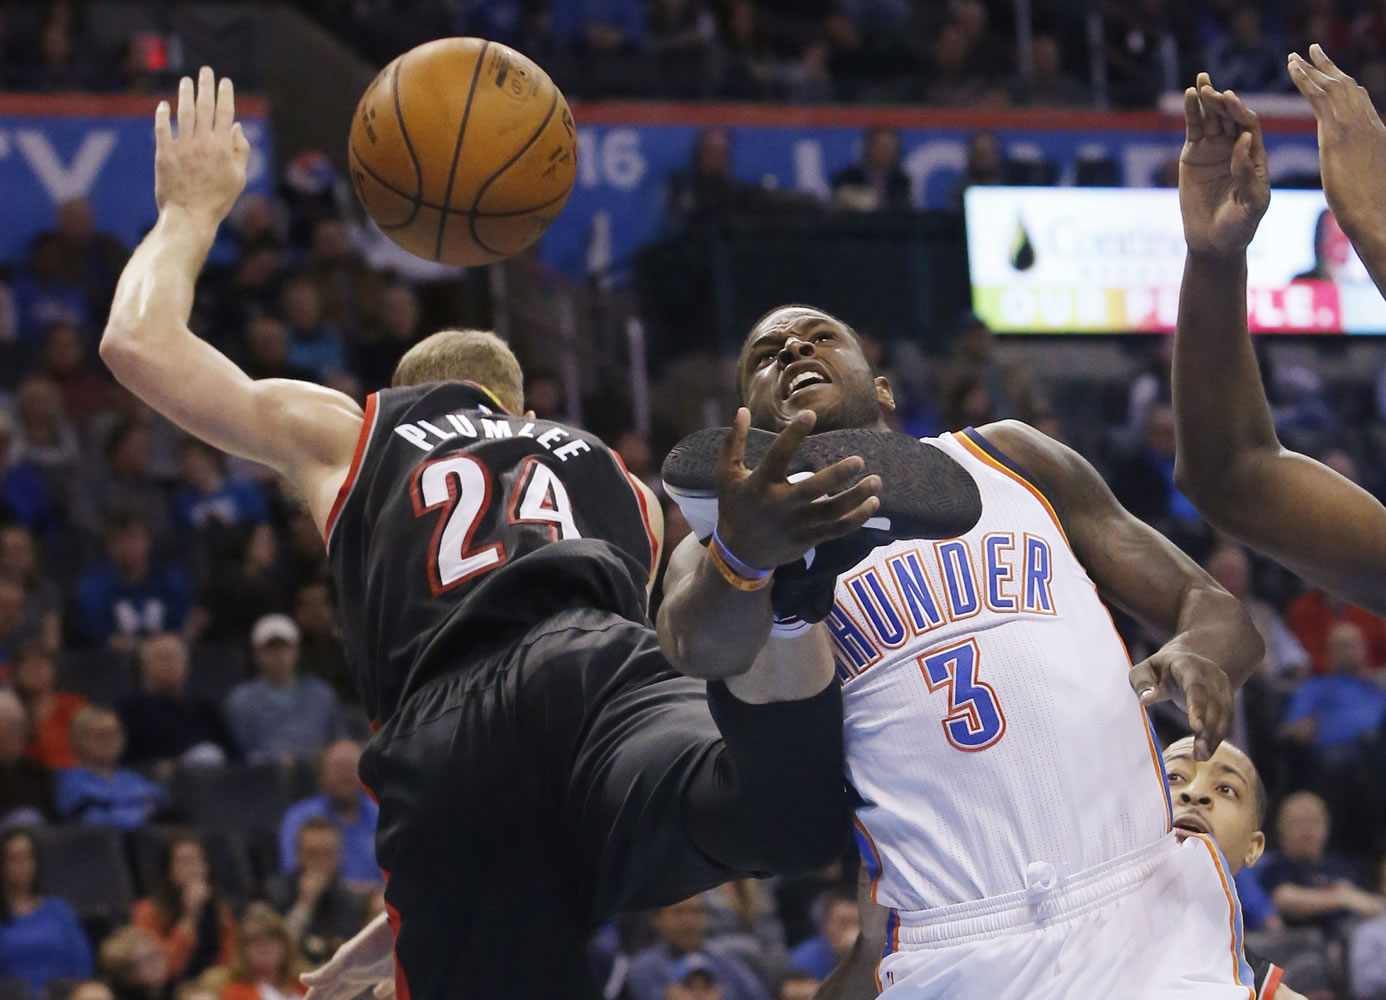 Oklahoma City Thunder guard Dion Waiters (3) loses the ball between Portland Trail Blazers center Mason Plumlee (24) and guard C.J. McCollum during the third quarter of an NBA basketball game in Oklahoma City, Wednesday, Dec. 16, 2015. Oklahoma City won 106-90.